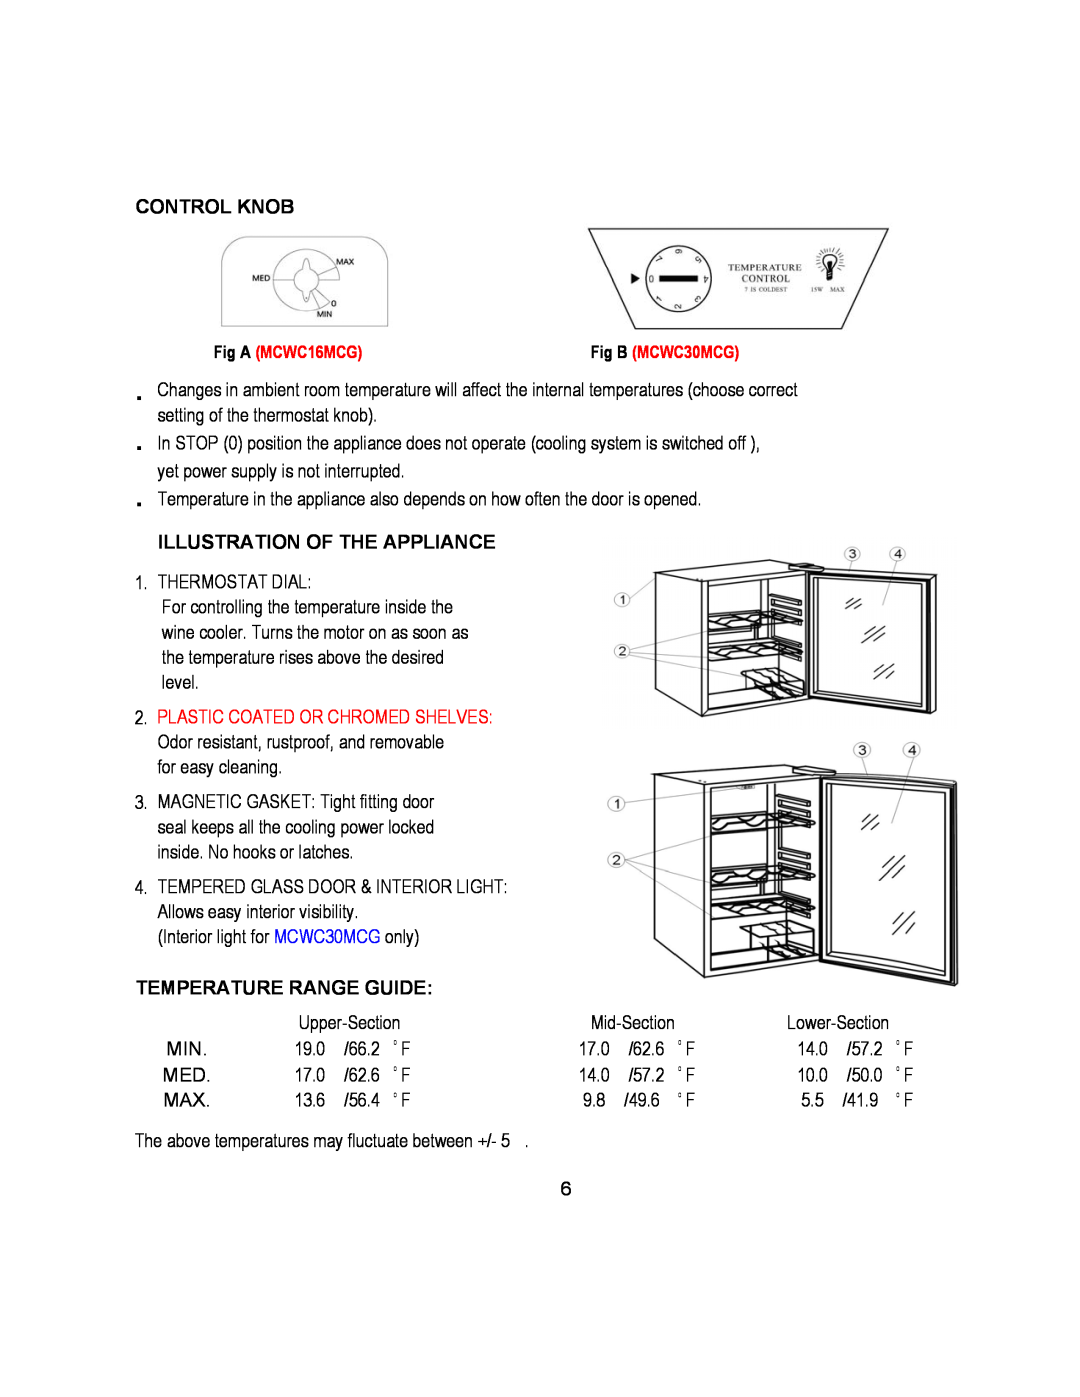 Magic Chef MCWC30MCG, MCWC16MCG operating instructions Control Knob, Illustration Of The Appliance, Temperature Range Guide 